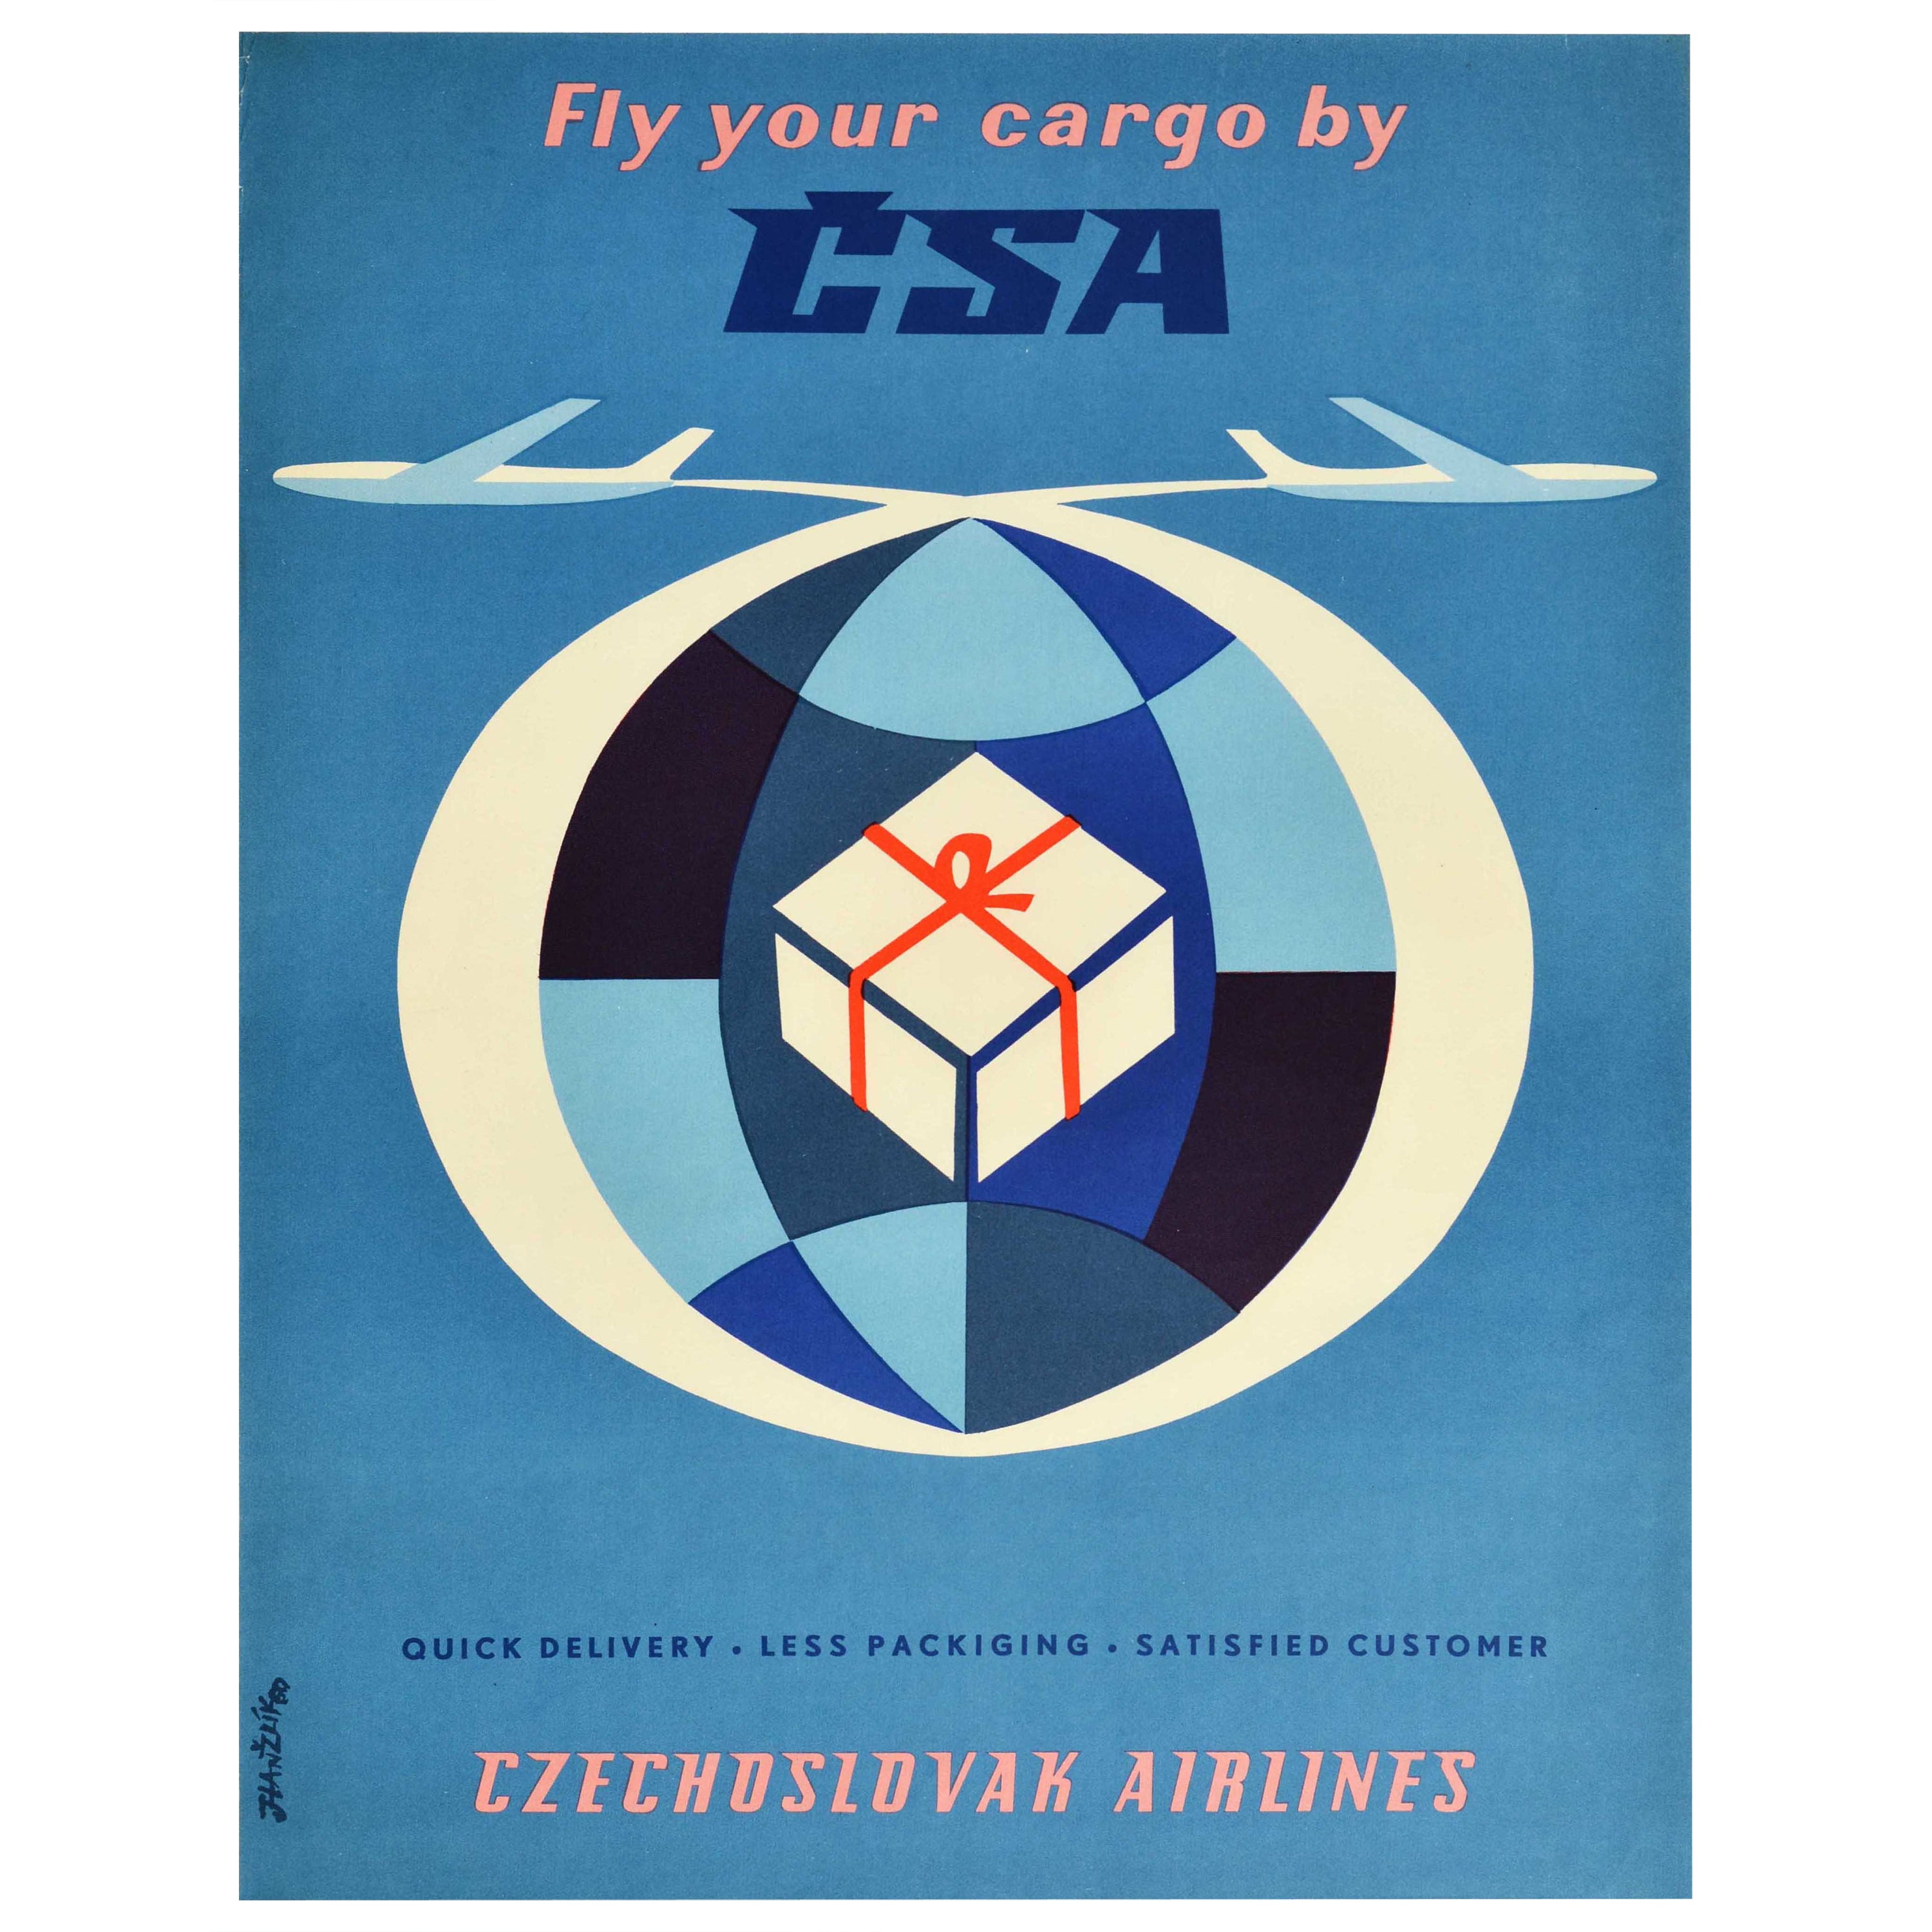 Original Vintage Advertising Poster Fly Your Cargo By CSA Czechoslovak Airlines